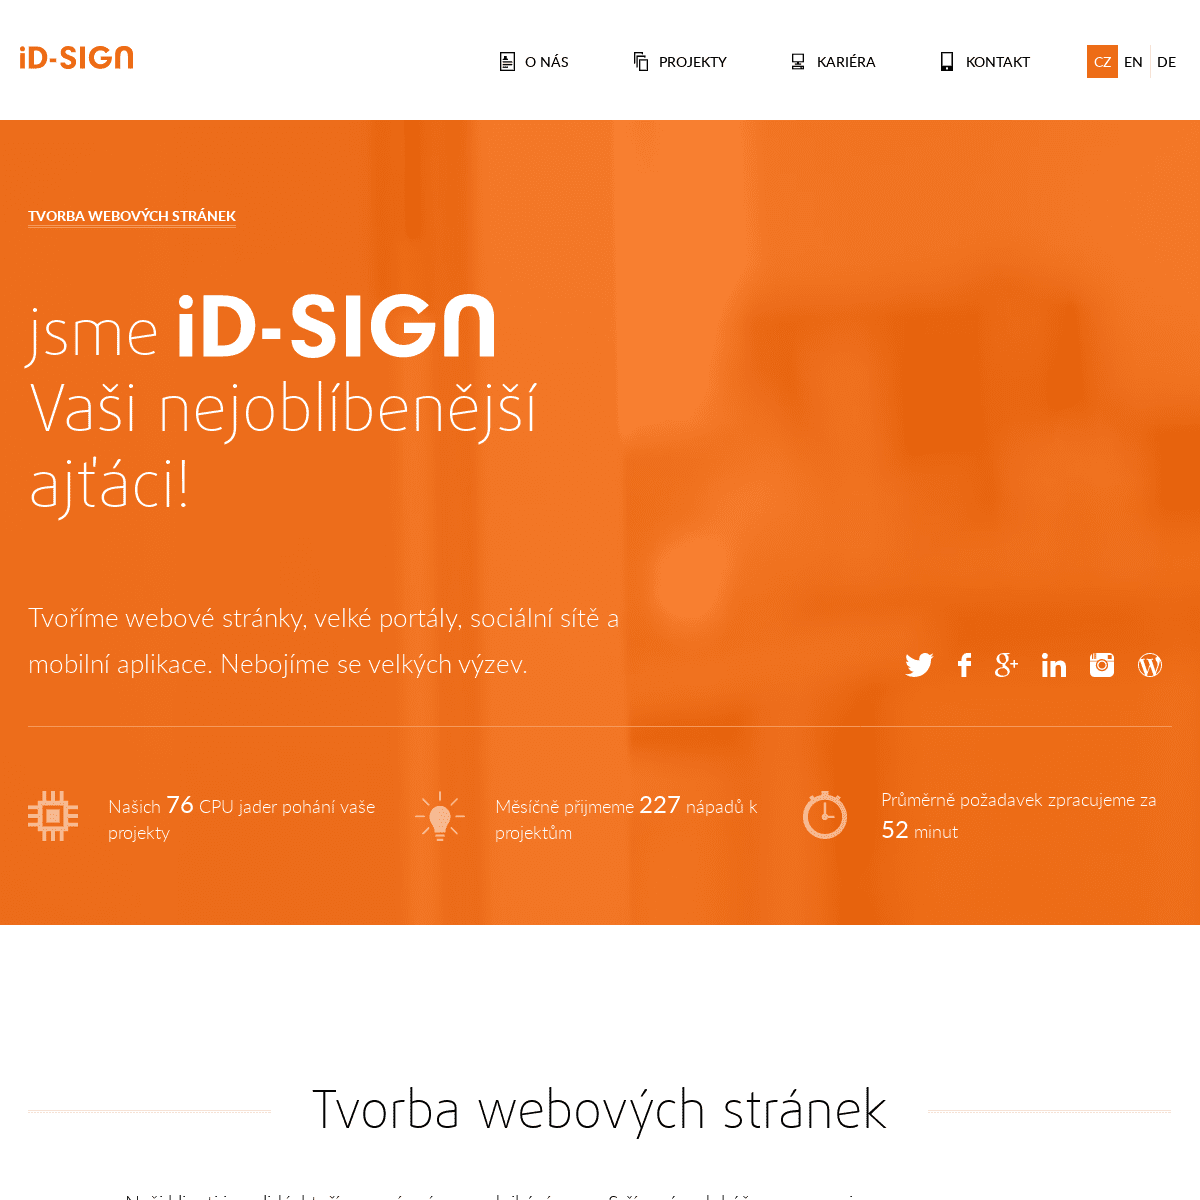 A complete backup of id-sign.com